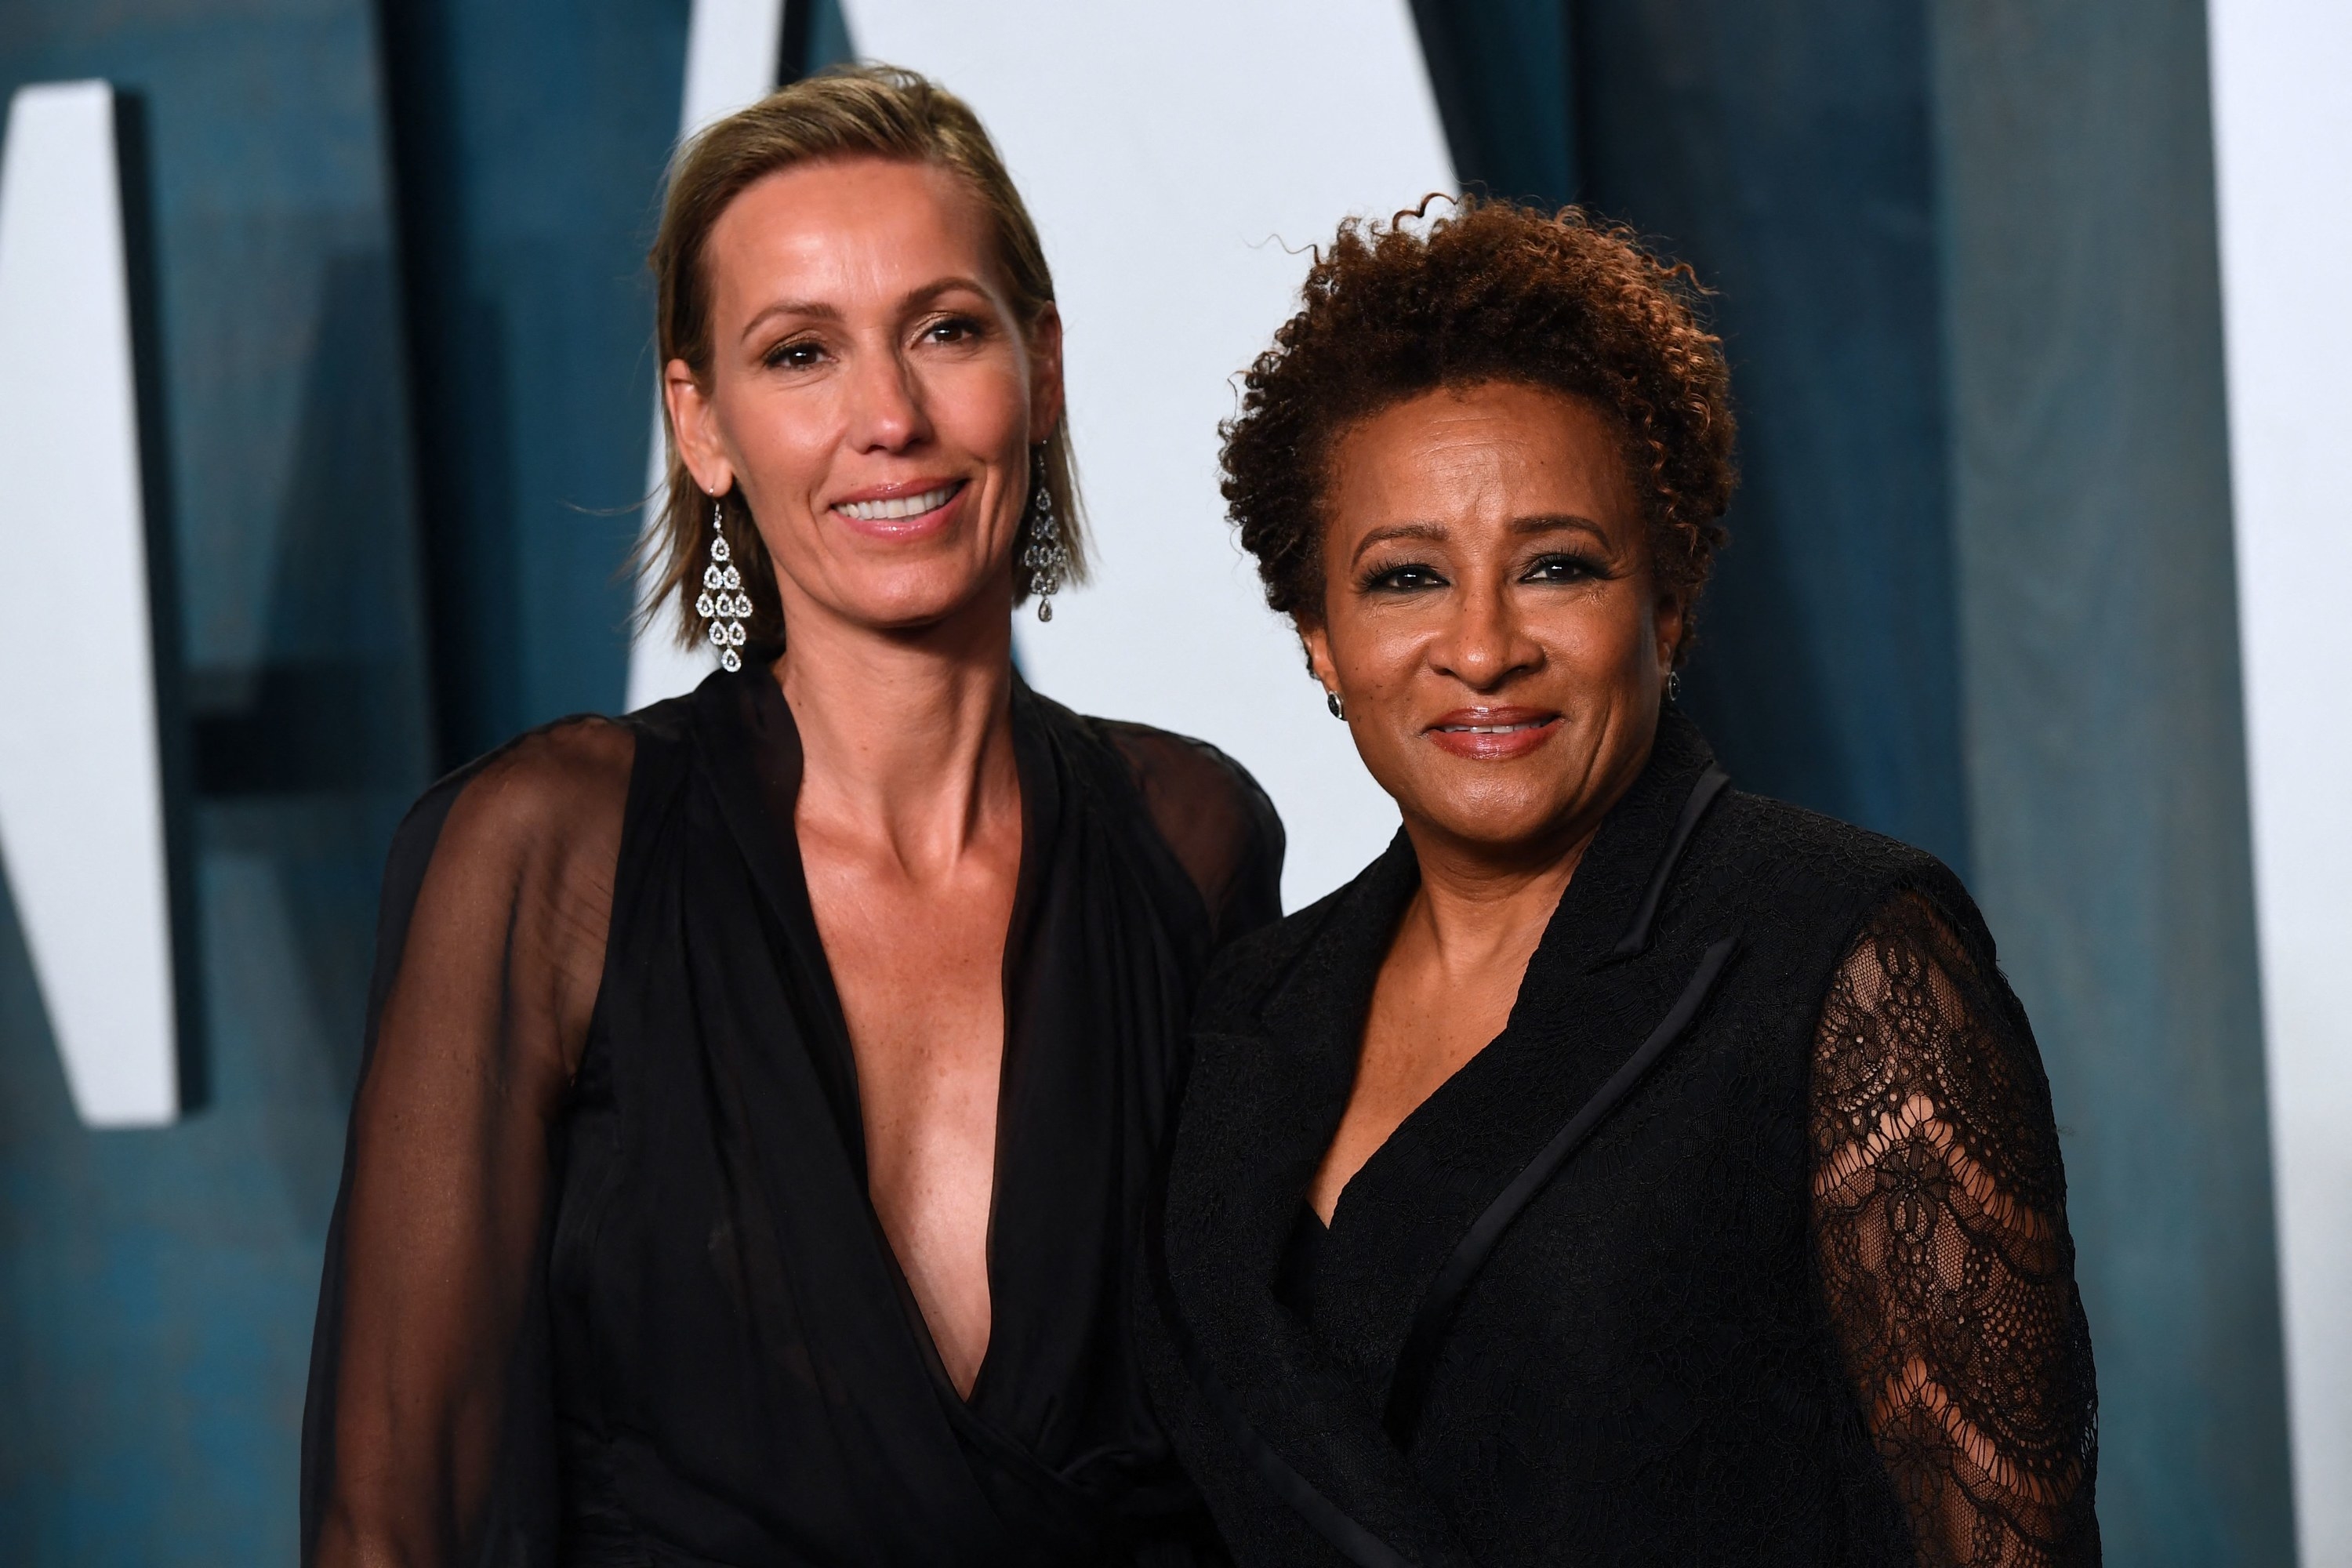 US actress and comedian Wanda Sykes (R) and her wife Alex Syke attend the 2022 Vanity Fair Oscar Party following the 94th Oscars at the The Wallis Annenberg Center for the Performing Arts in Beverly Hills, California on March 27, 2022